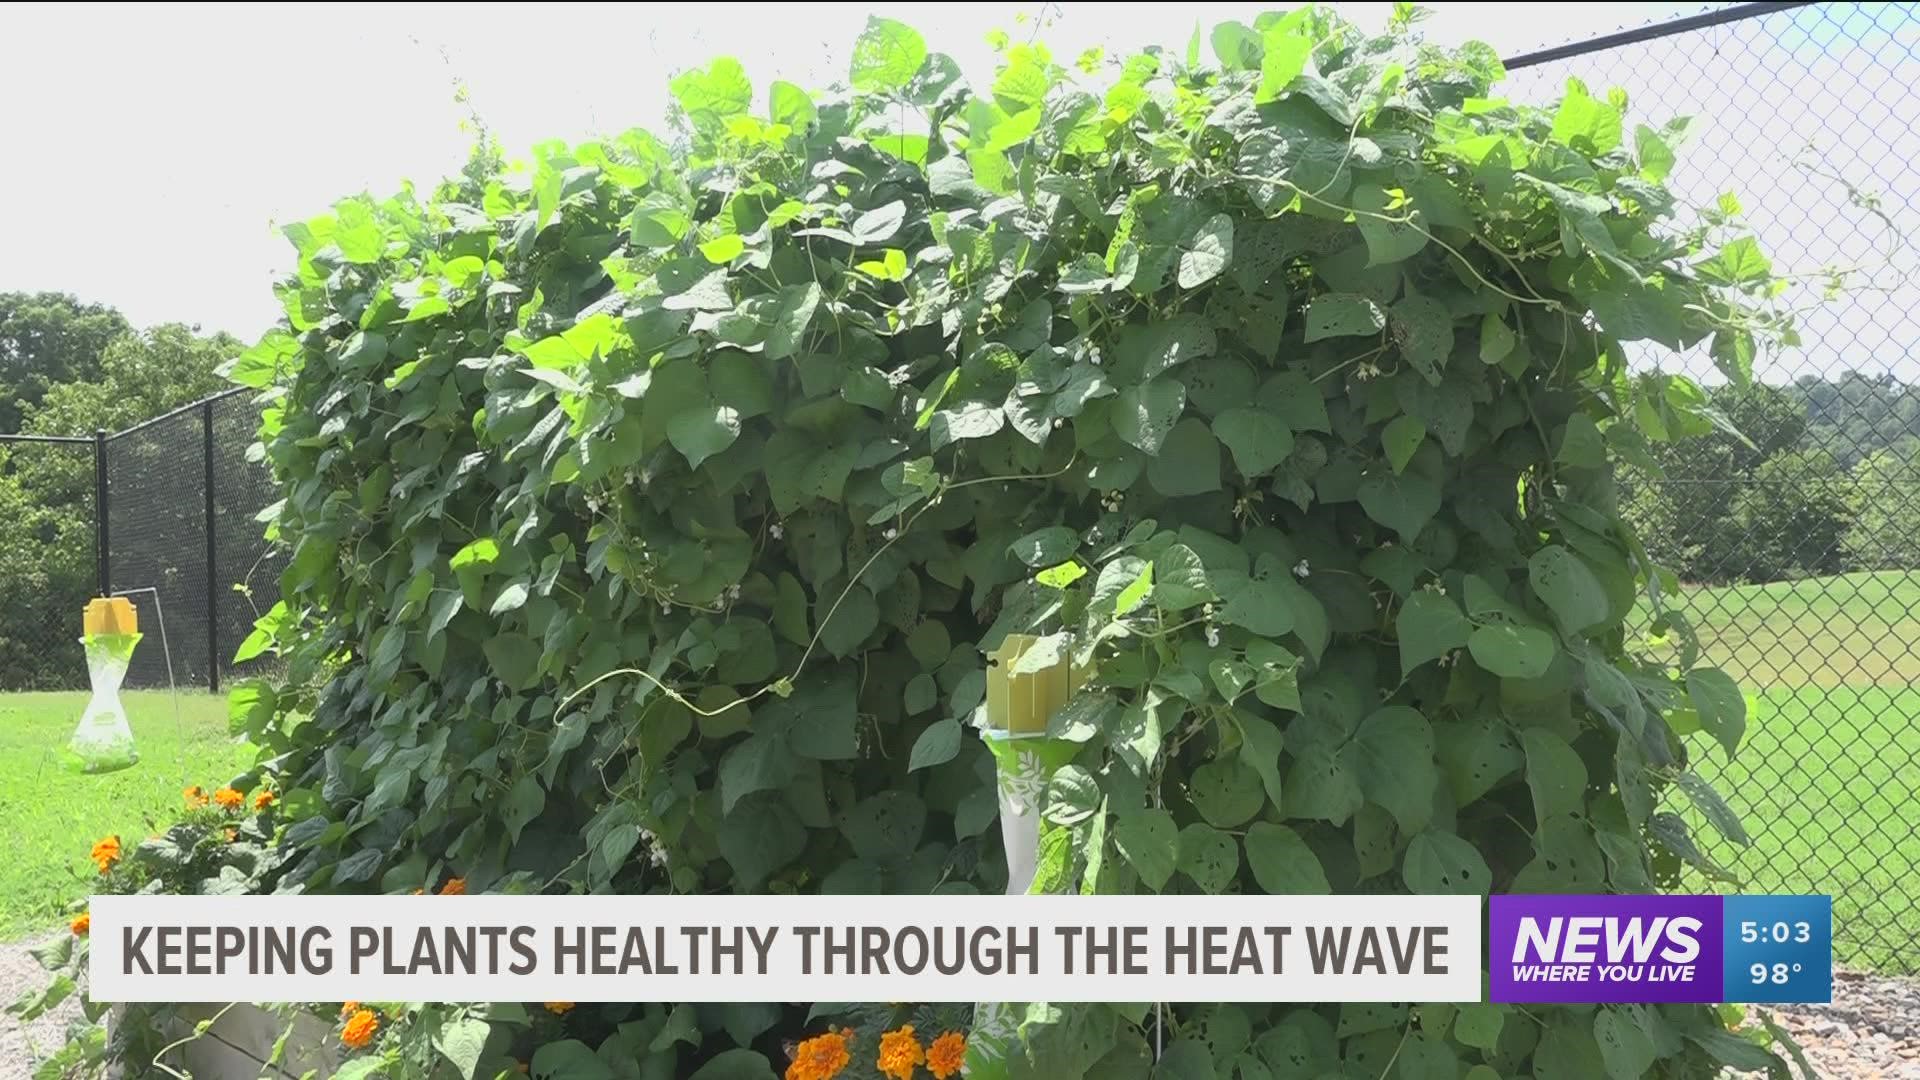 Here are some tips on how to keep your plants healthy through the heat wave.